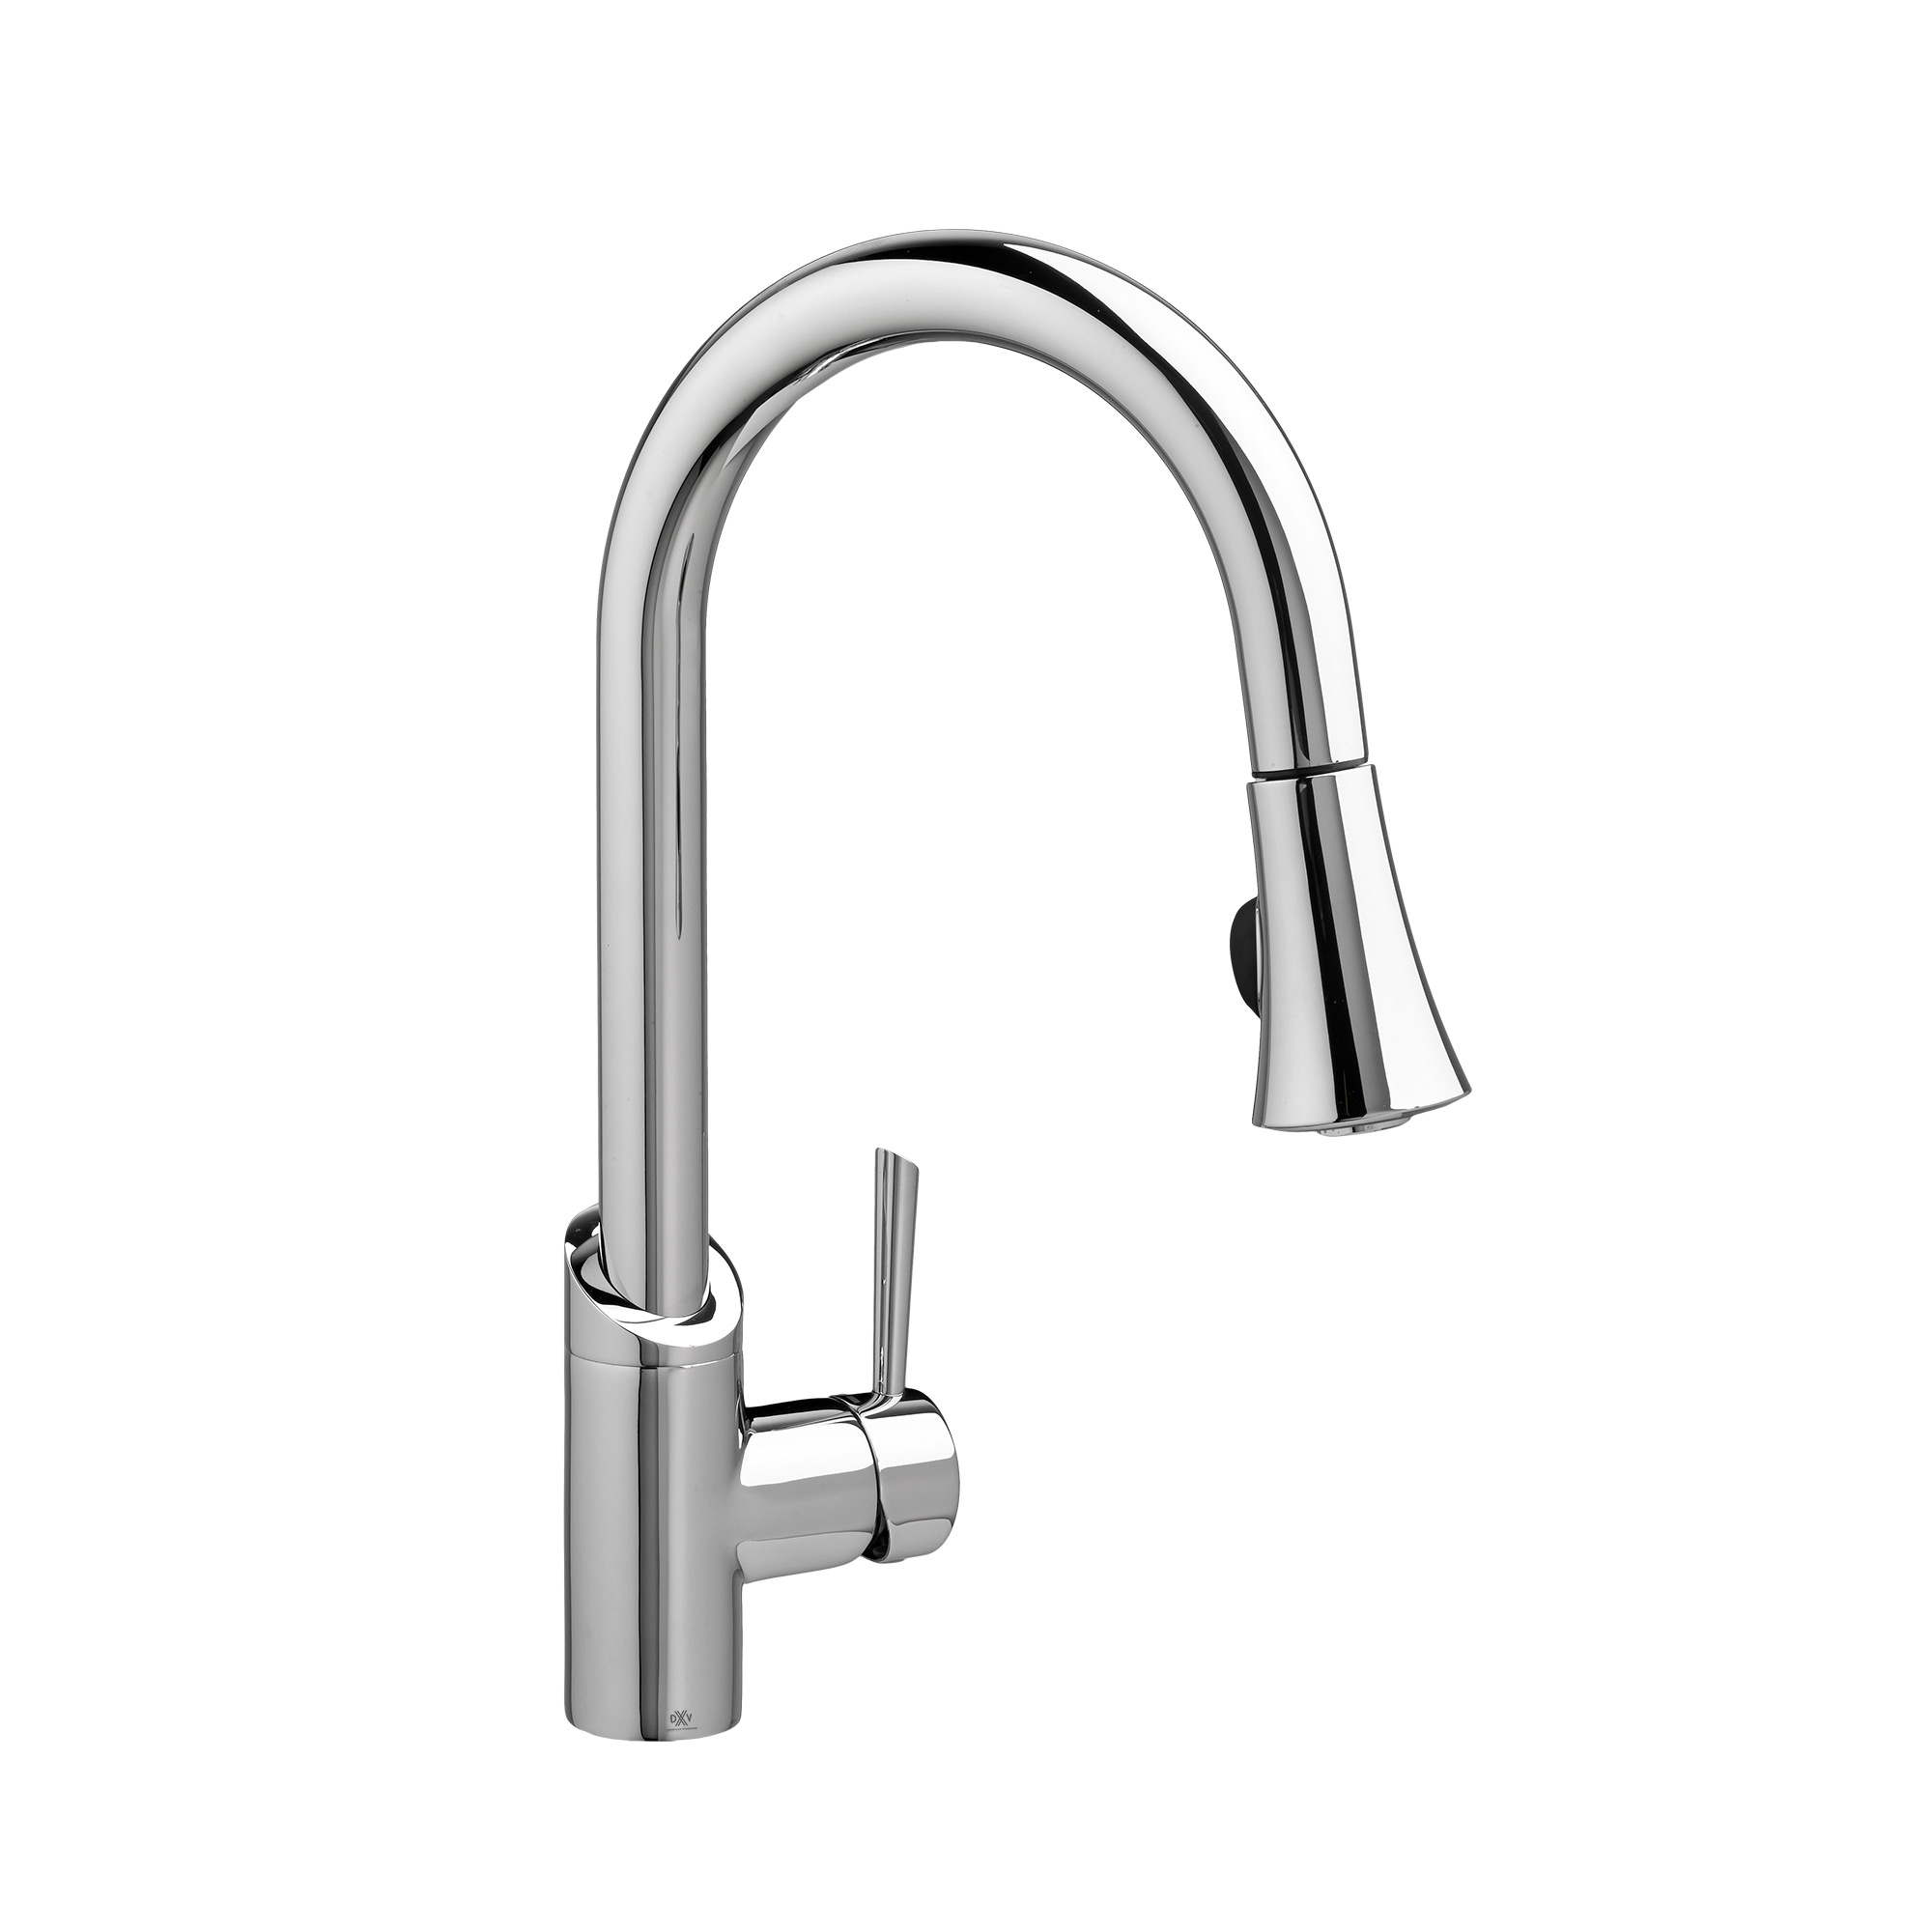 Fresno® Single Handle Pull-Down Kitchen Faucet with Lever Handle